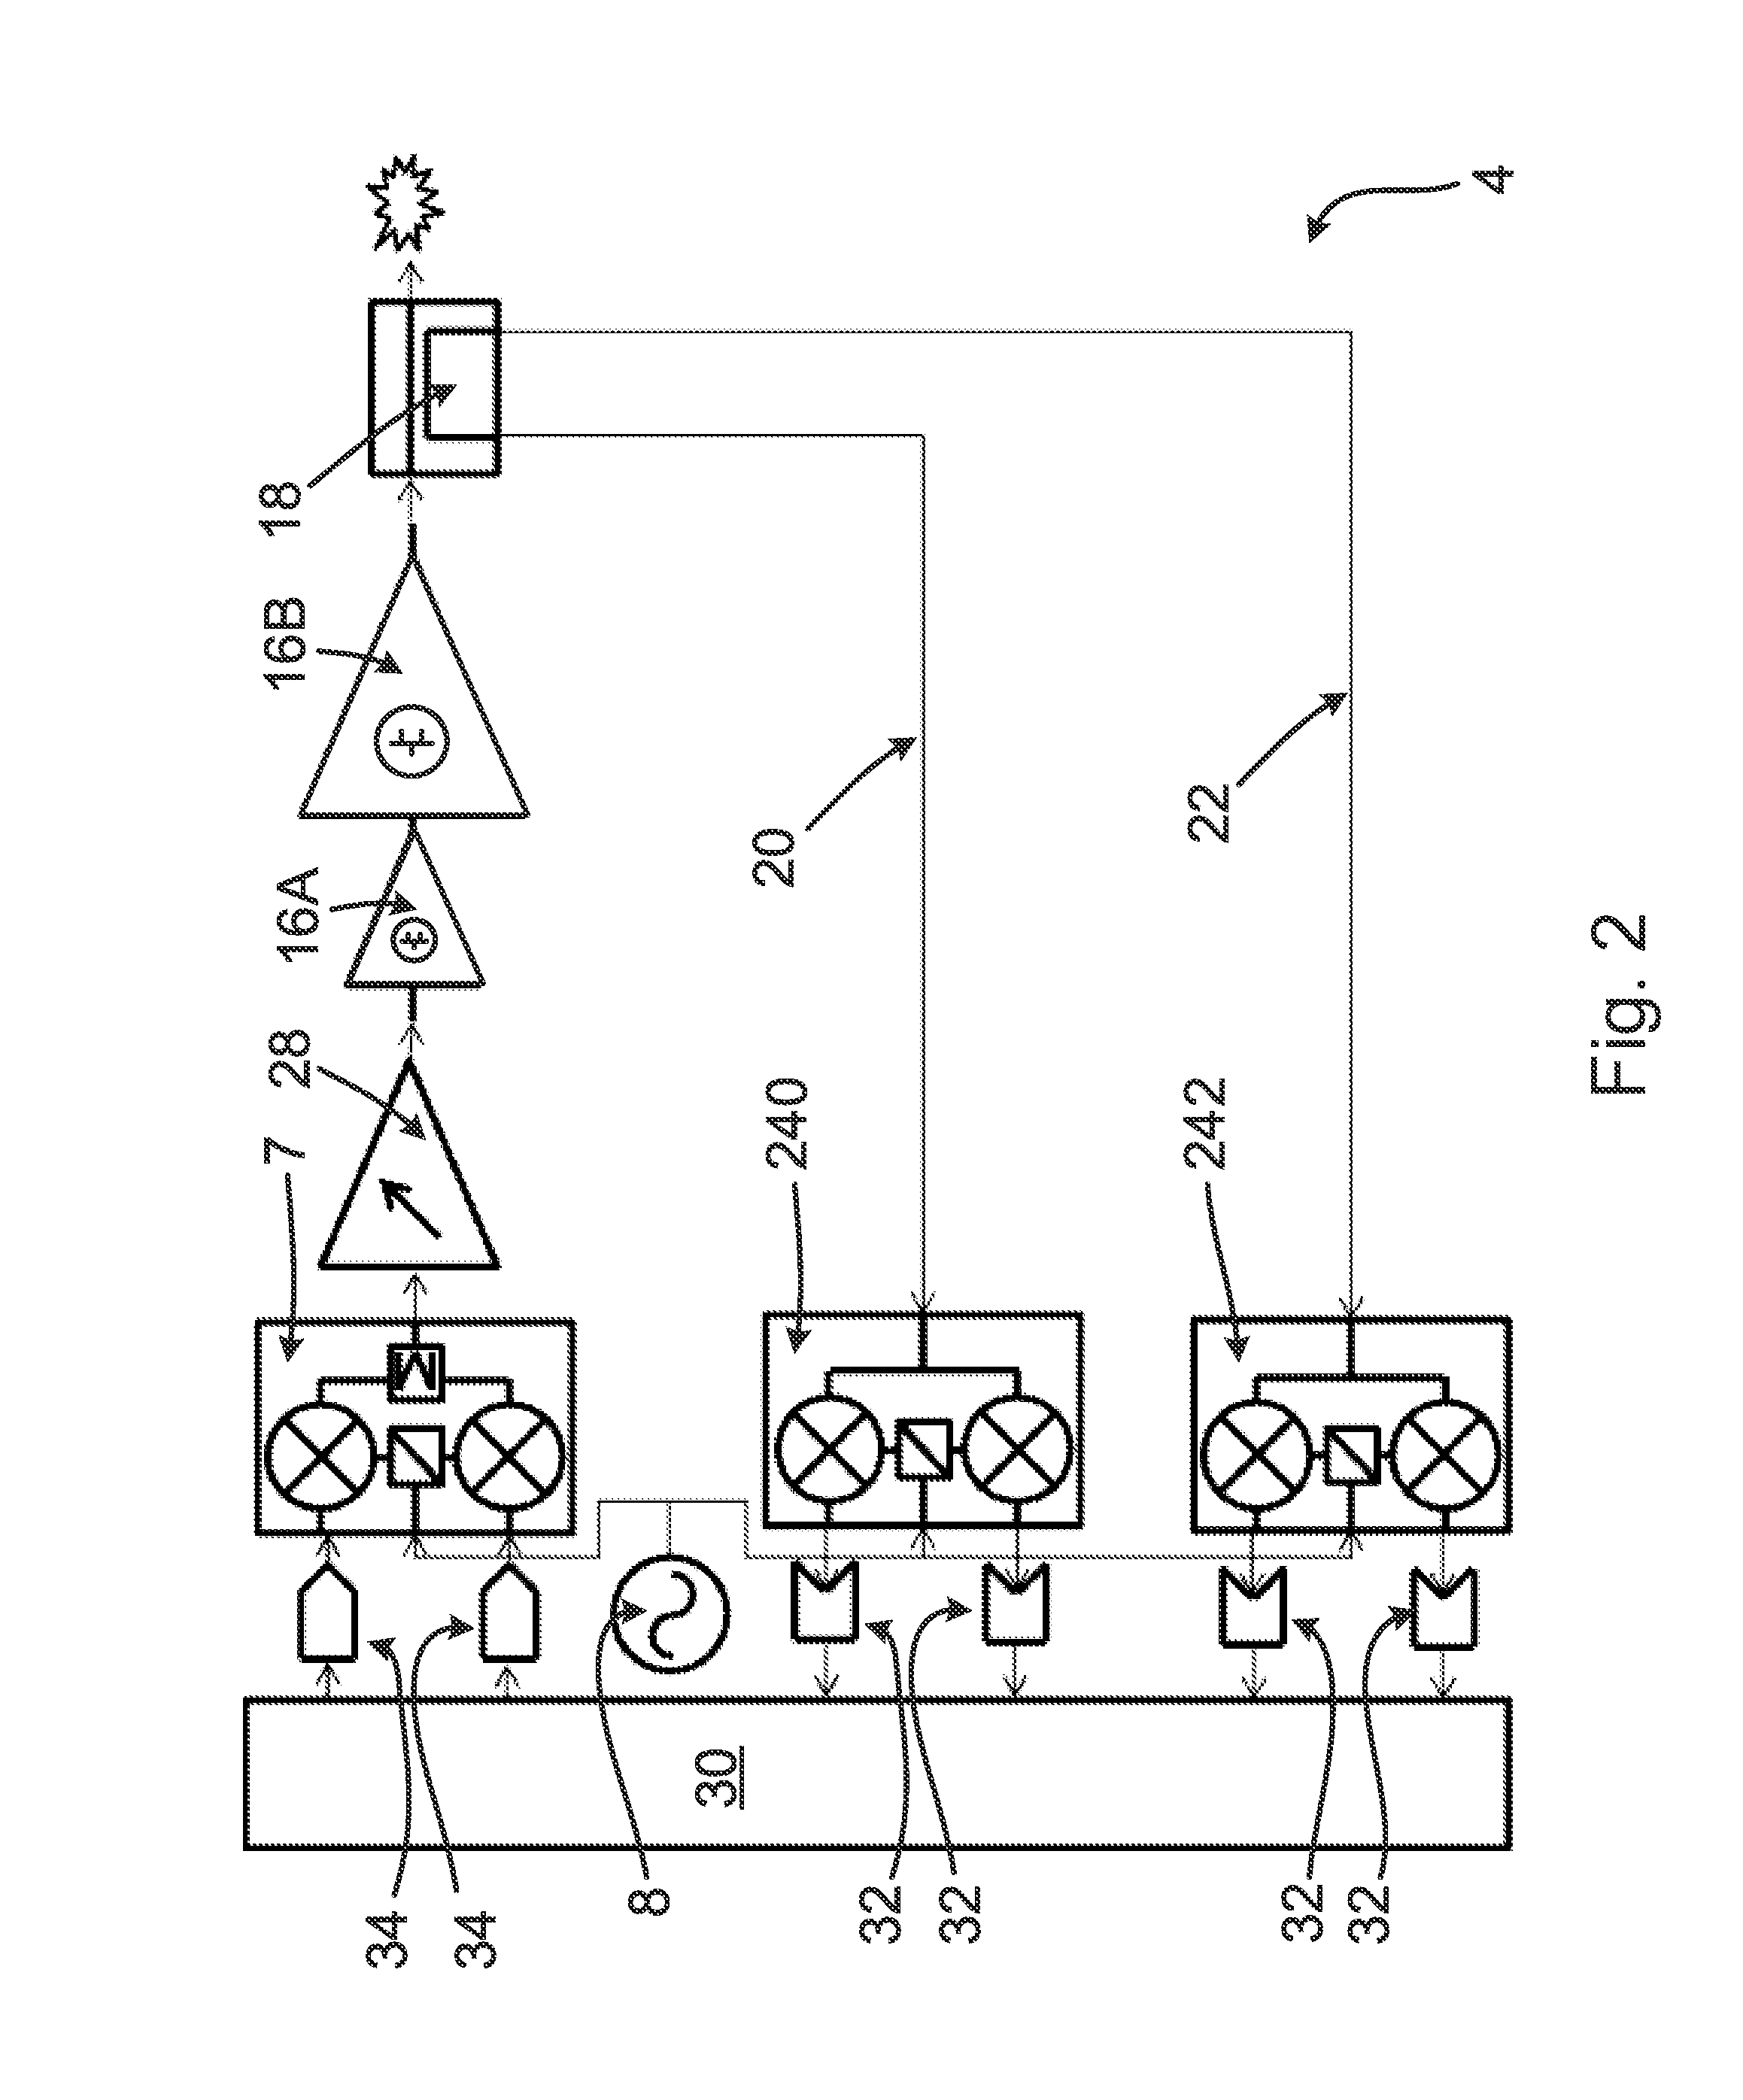 Radio frequency heating apparatus